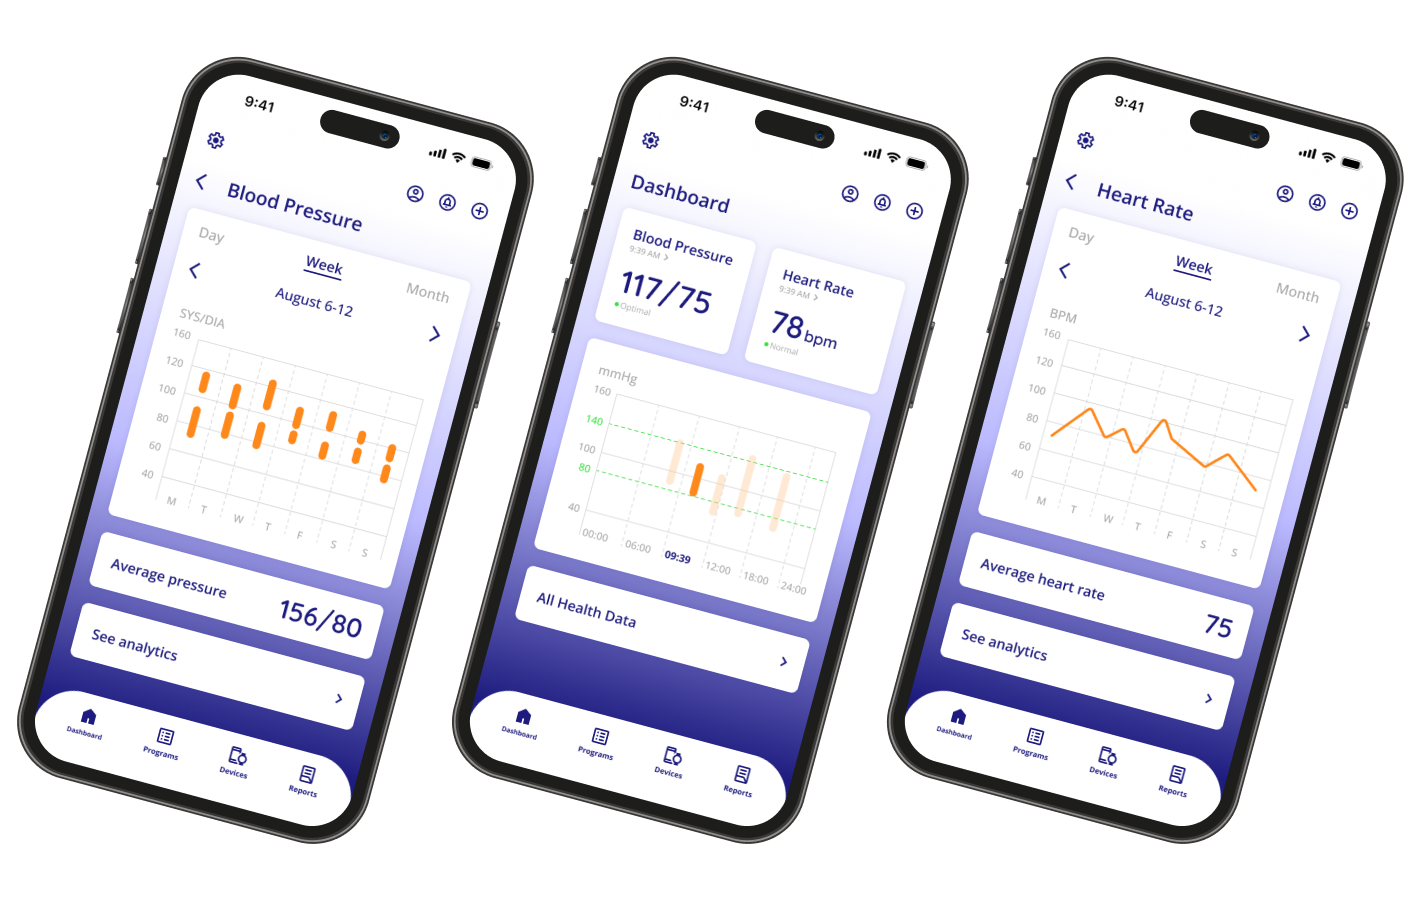 Blood pressure apps showing readings